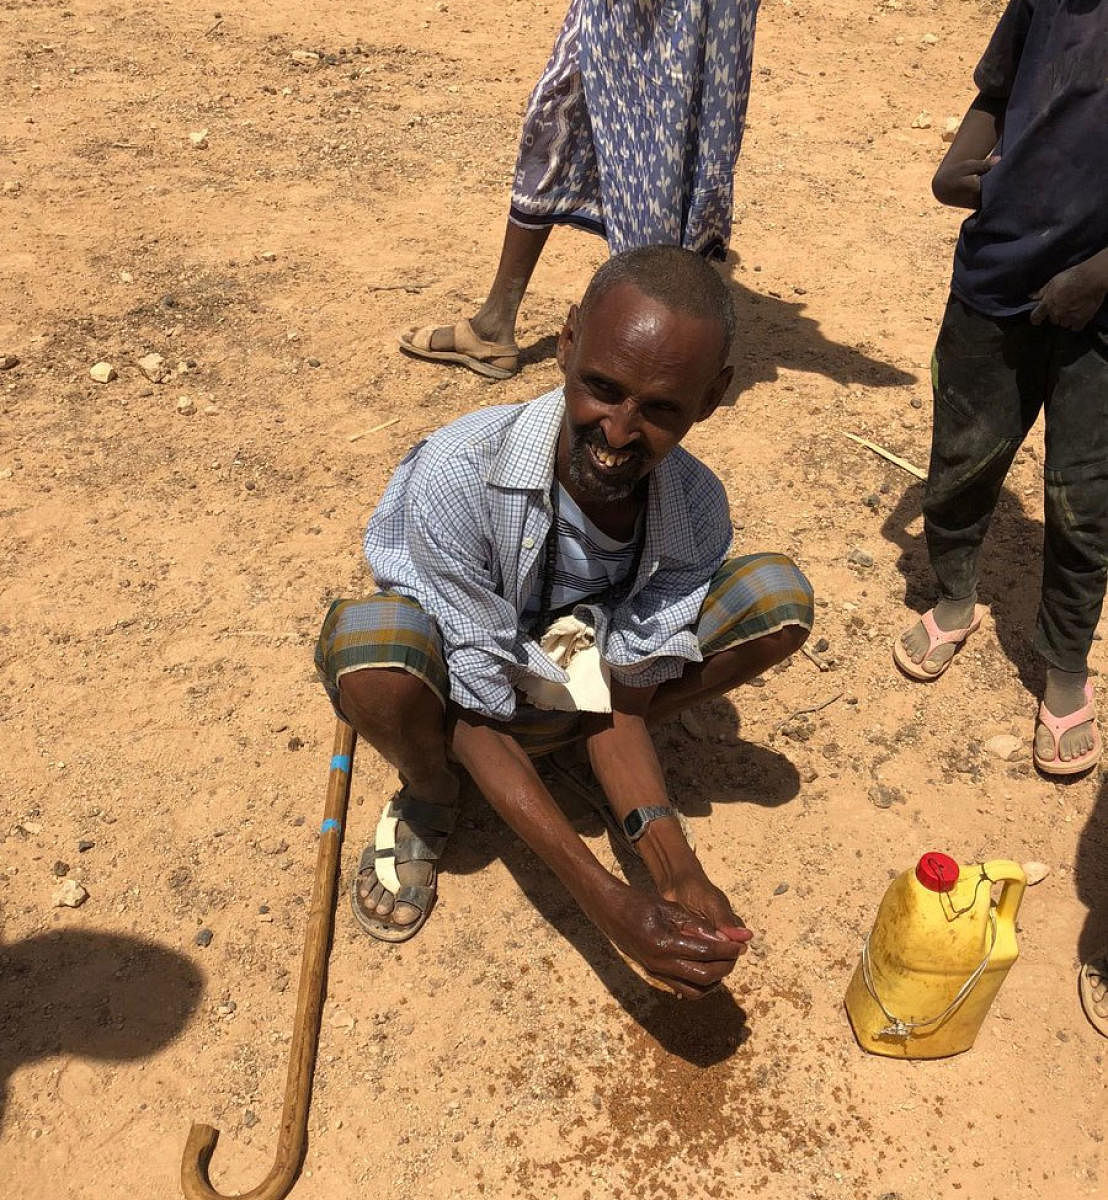 If predictions prove correct, Ethiopia will soon face its fourth consecutive year of drought, with the lack of rain hitting pastoralist herders worst. Picture courtesy Twitter